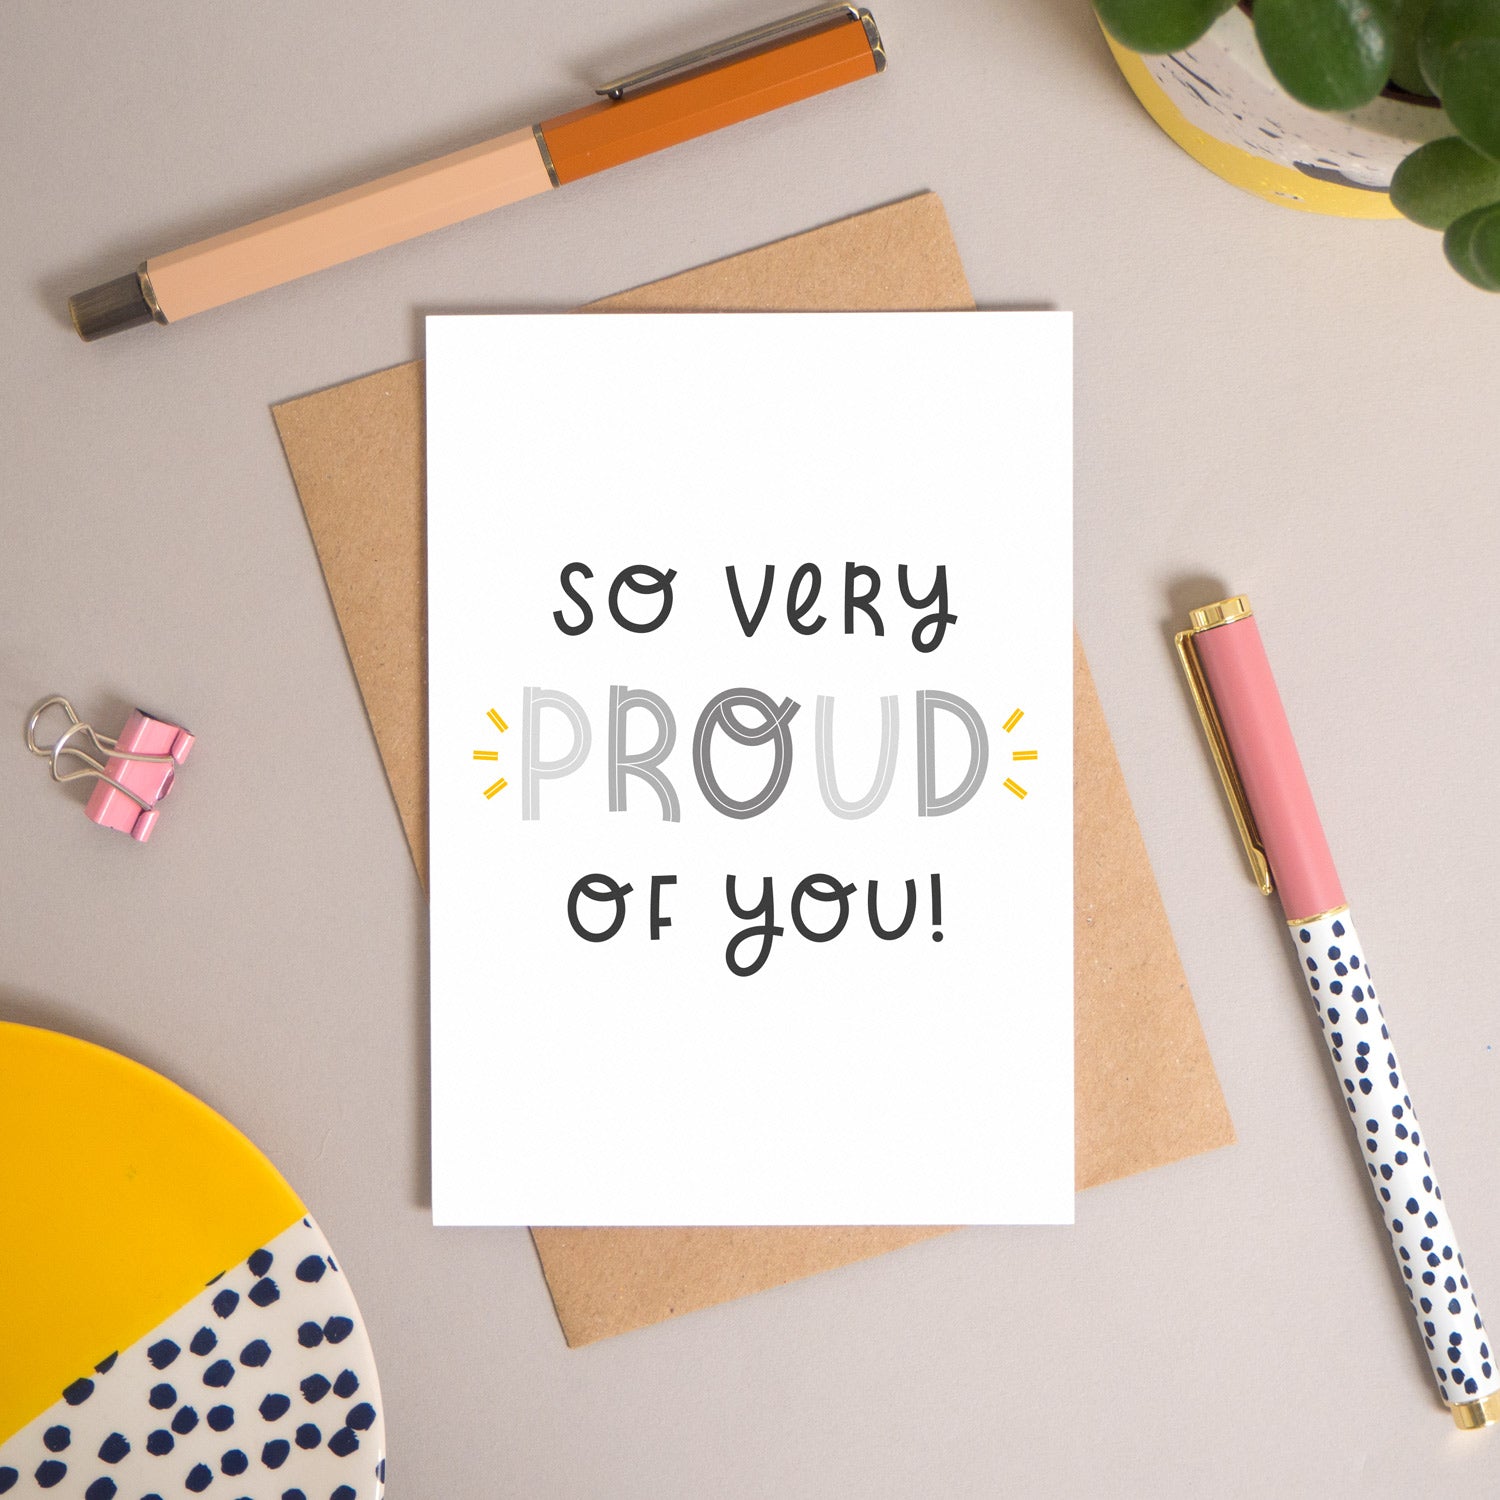 This ‘so very proud of you’ card has been shot flatlay style looking directly over the top of the card. It is lying flat on it’s kraft brown envelope, on a warm grey background. Surrounding the card are pens, a clip, a plant and a trinket dish. This version of the card is in varying tones of grey